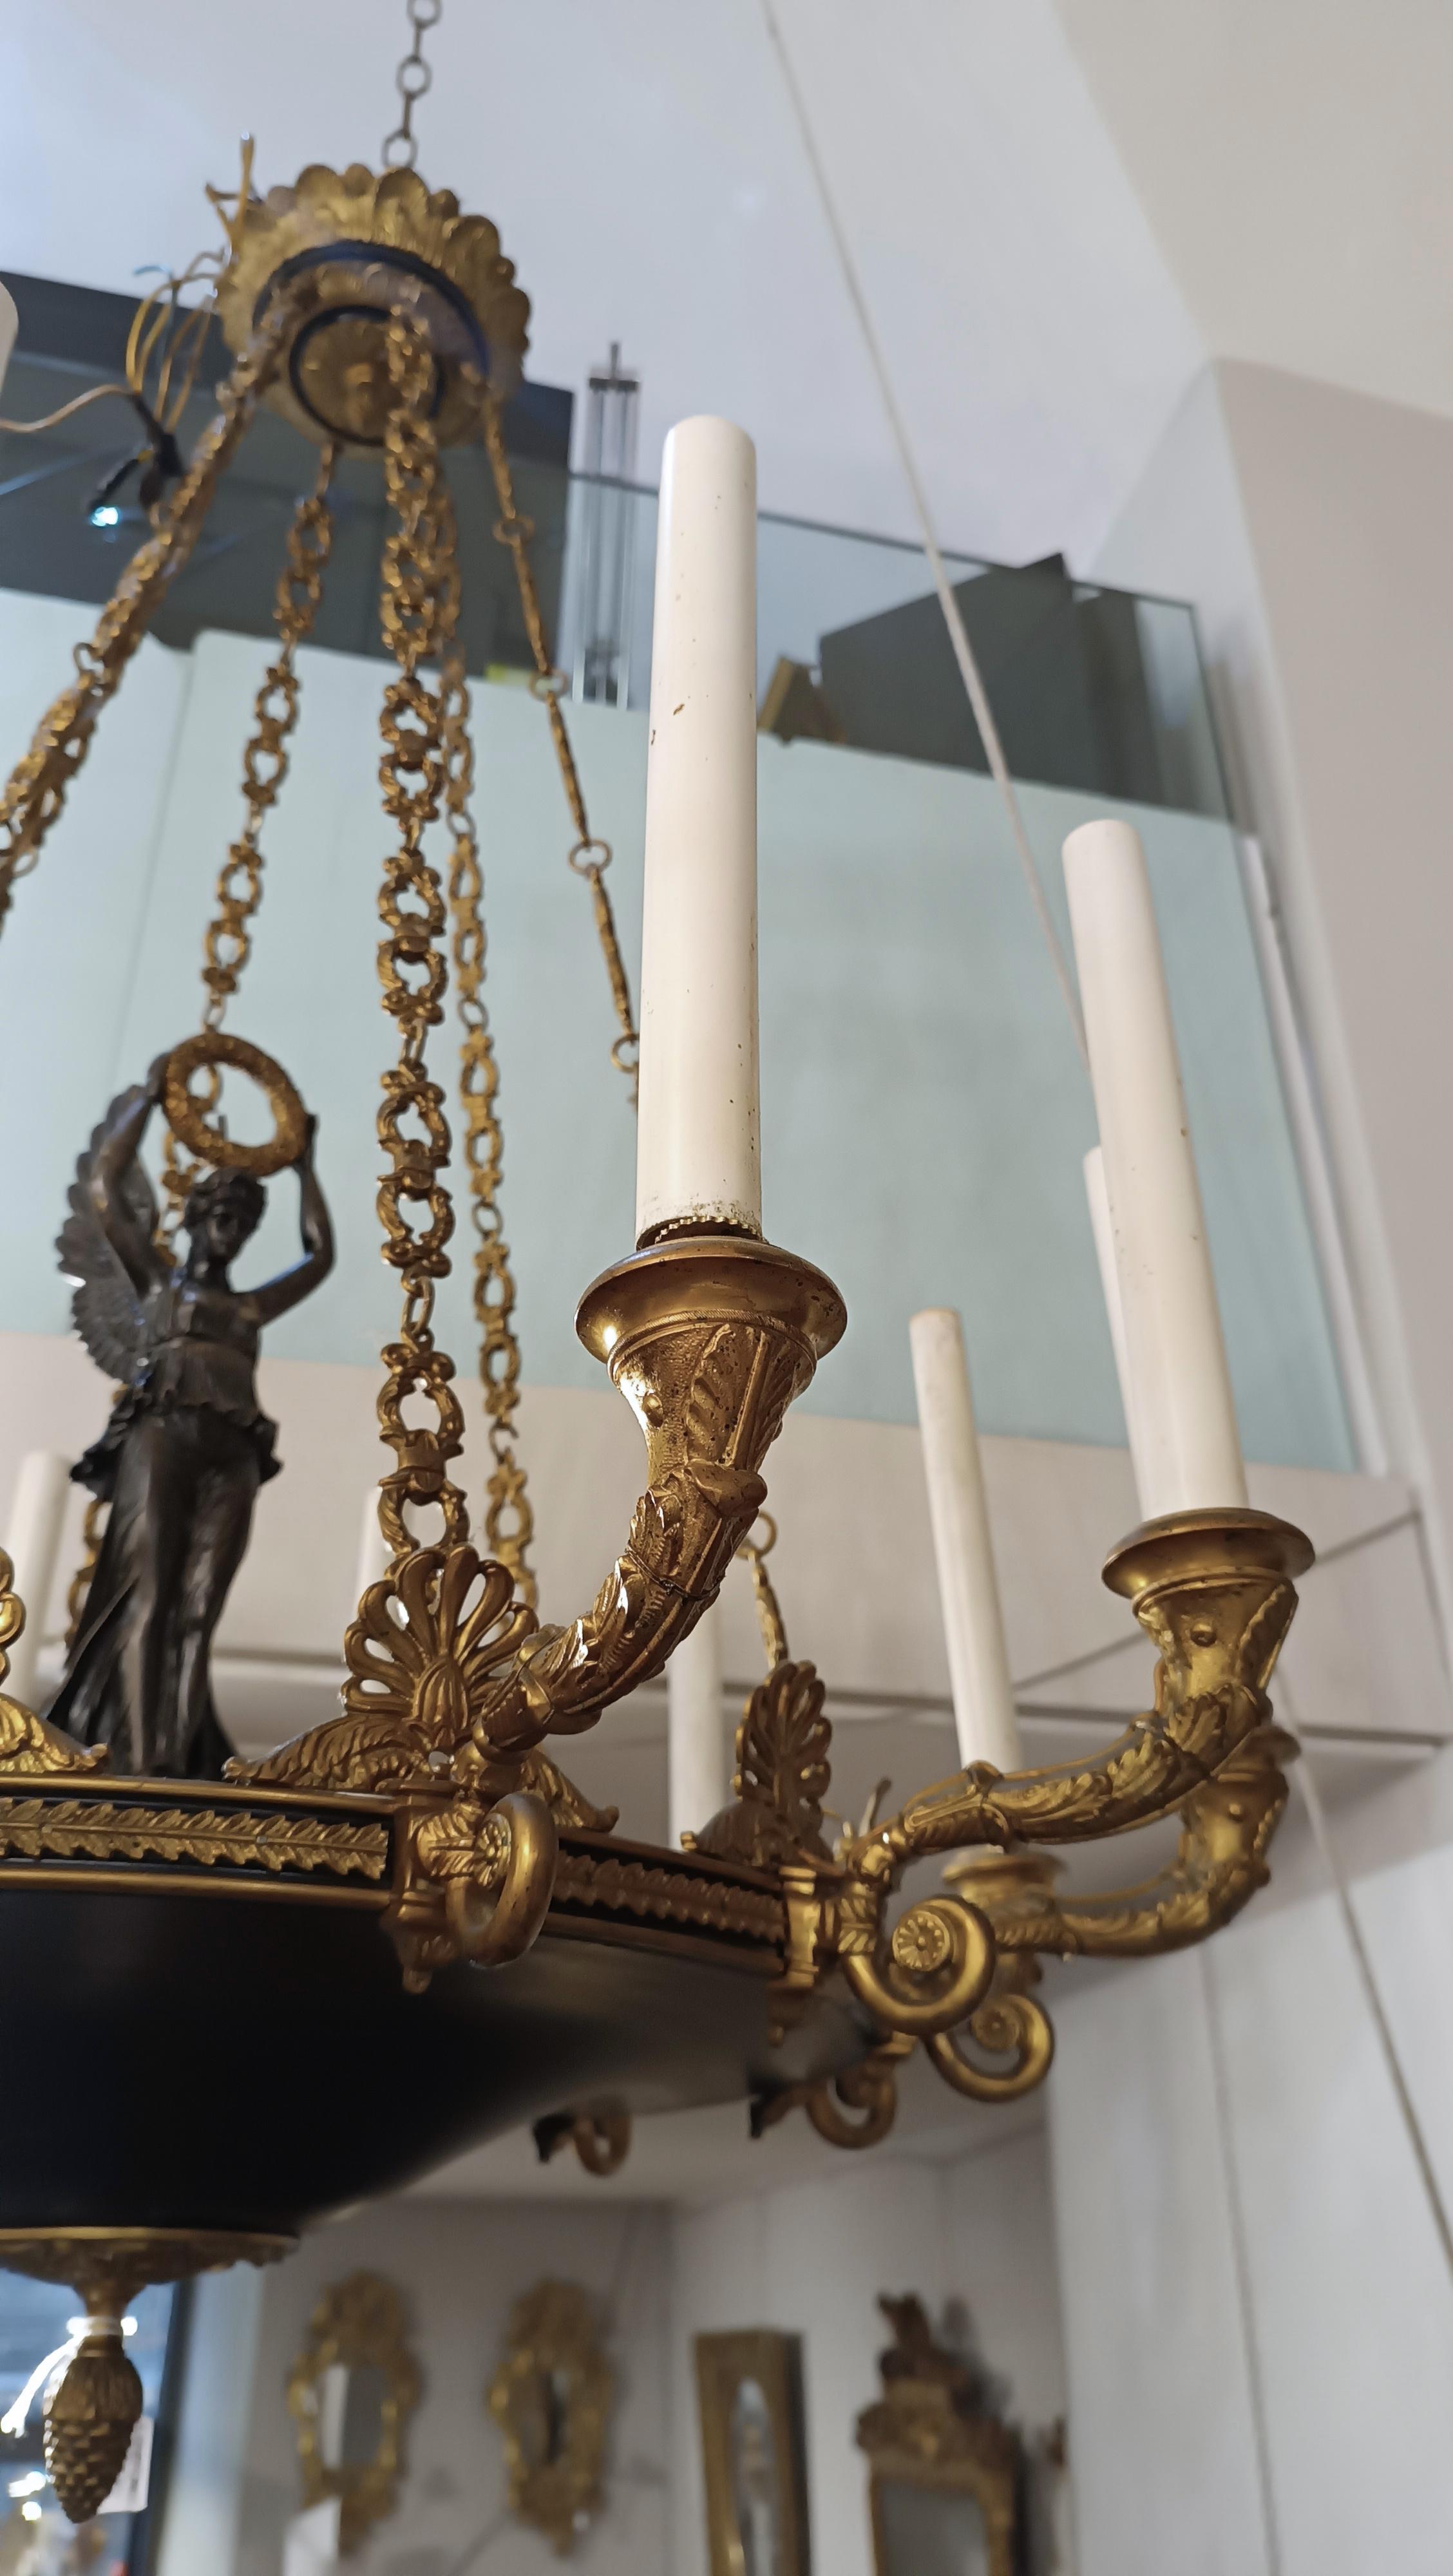 The English-style chandelier from the Napoleon III period represents an excellent example of furniture and design from the second half of the 19th century. Characterized by refined elegance, this chandelier is made of lost wax cast bronze, and